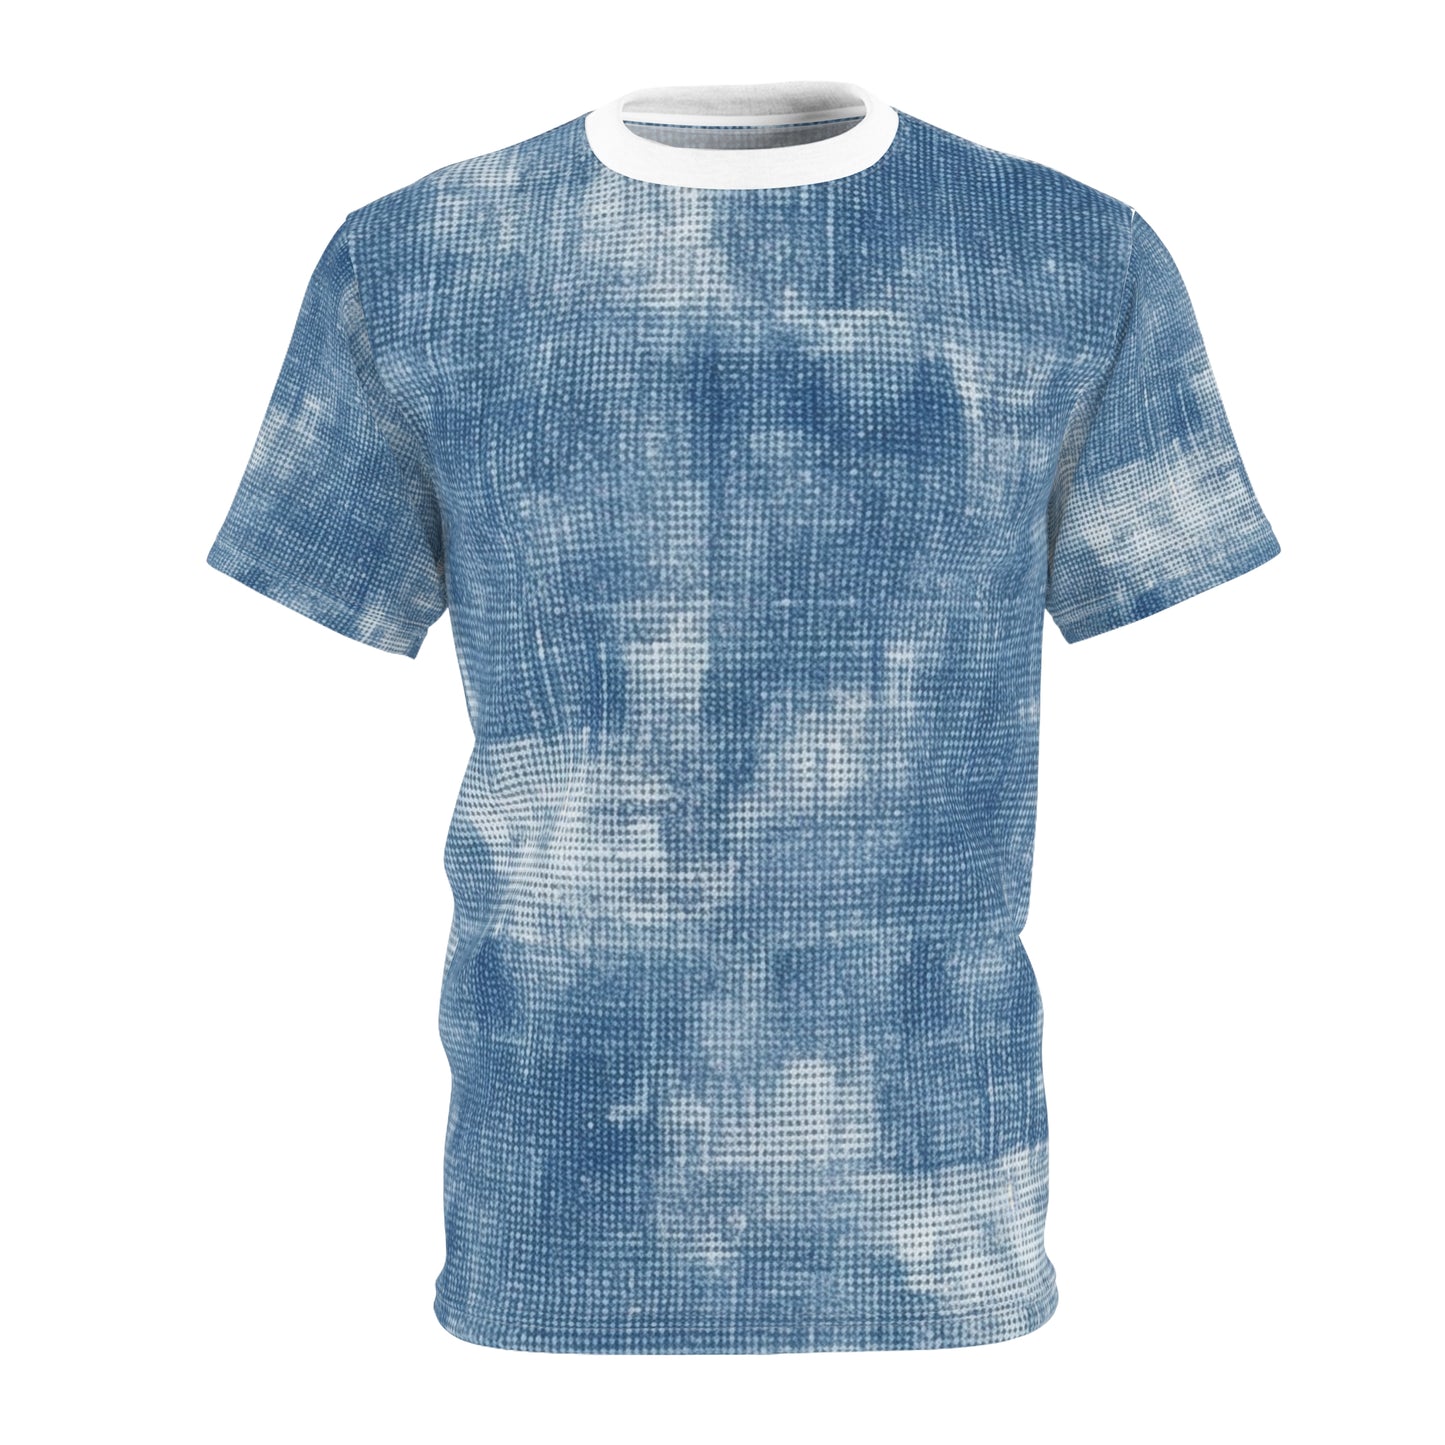 Faded Blue Washed-Out: Denim-Inspired, Style Fabric - Unisex Cut & Sew Tee (AOP)